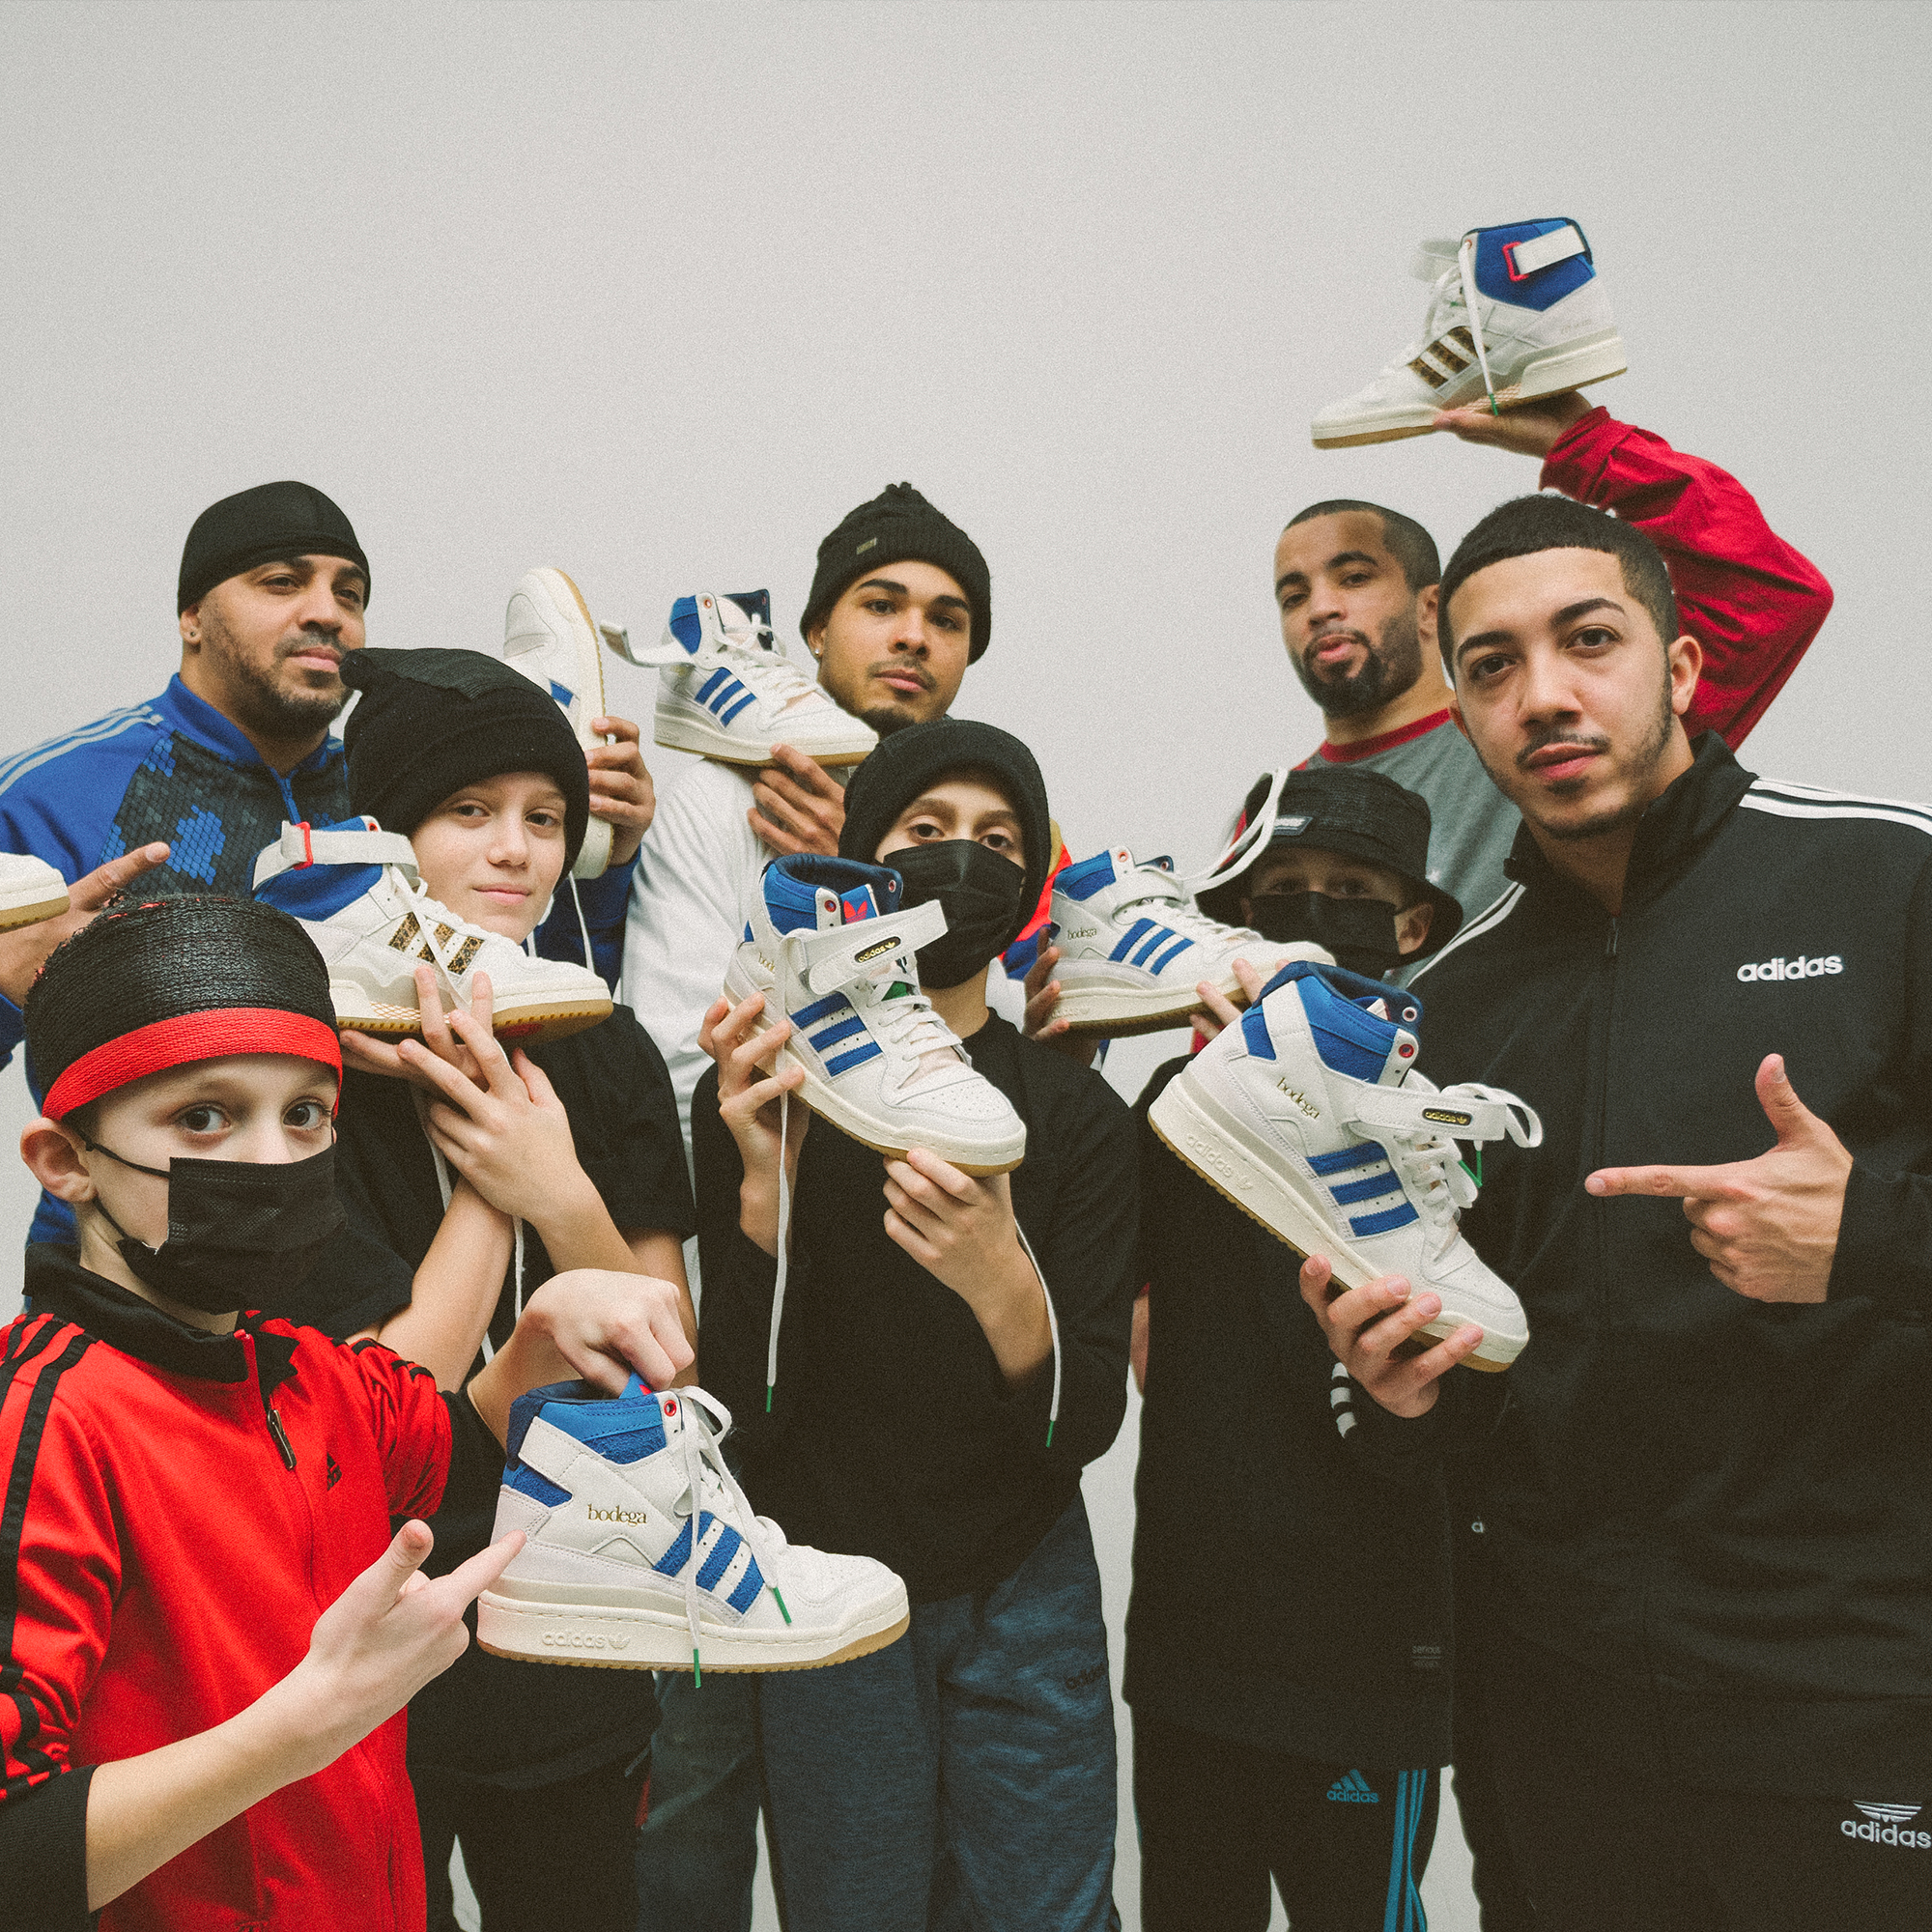 BODEGA on Twitter: "Founder of the legendary Floorlords, the legendary Boston-based breakdancing crew founded in 1981, Bboy Lino Delgado reminisces over Boston's relationship adidas the role in the history of